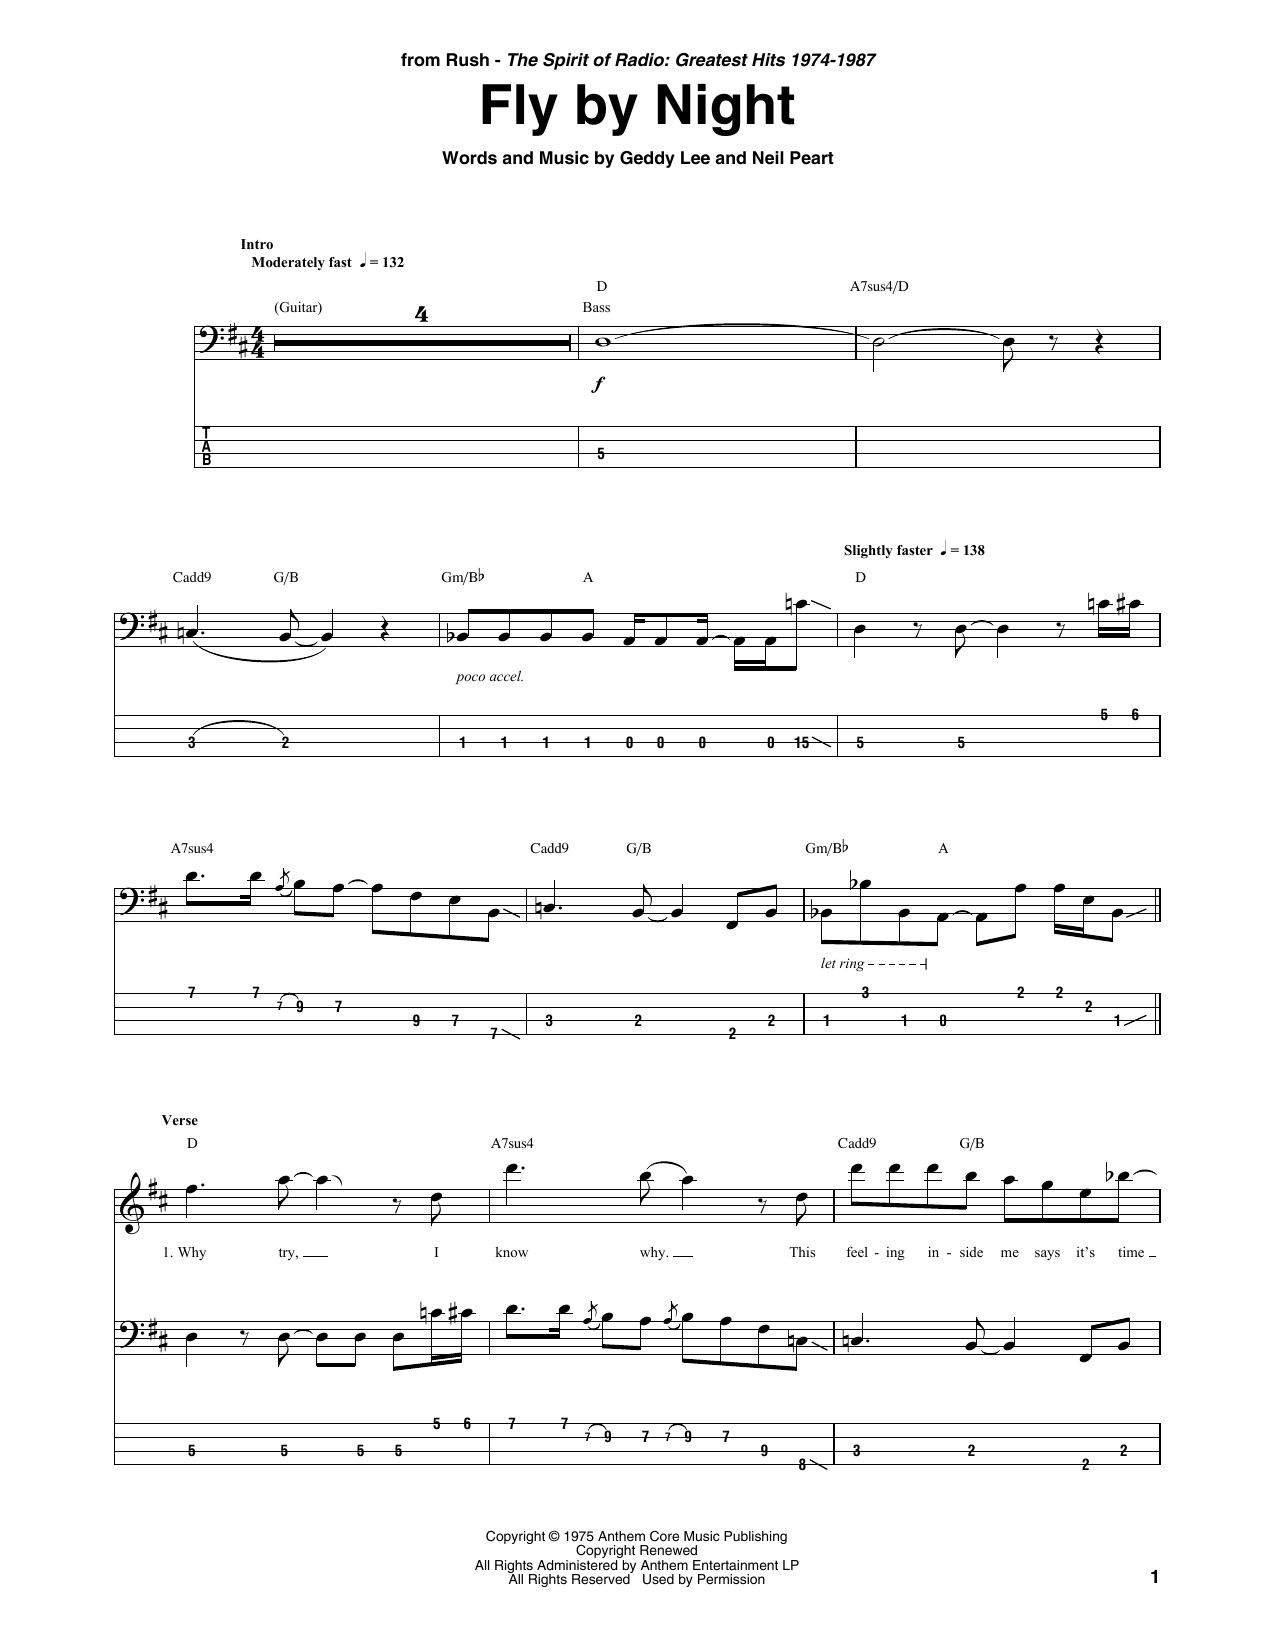 Download Rush Fly By Night Sheet Music